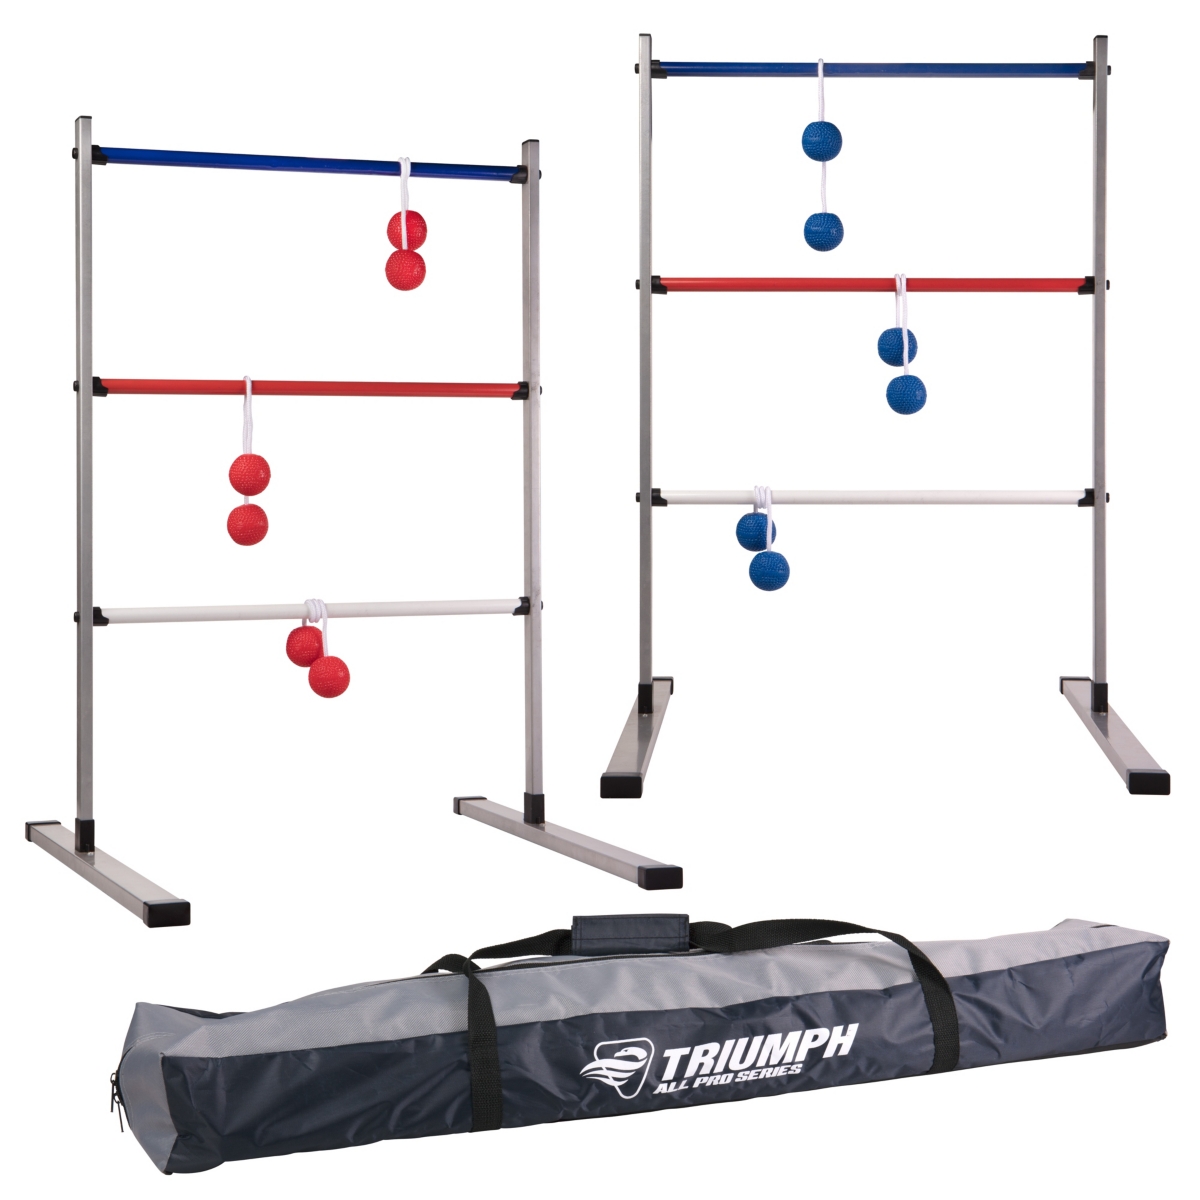 Viva Sol Triumph All Pro Series Press Fit Outdoor Ladderball Set Includes 6 Soft Ball Bolas And Durable Sport In Multi